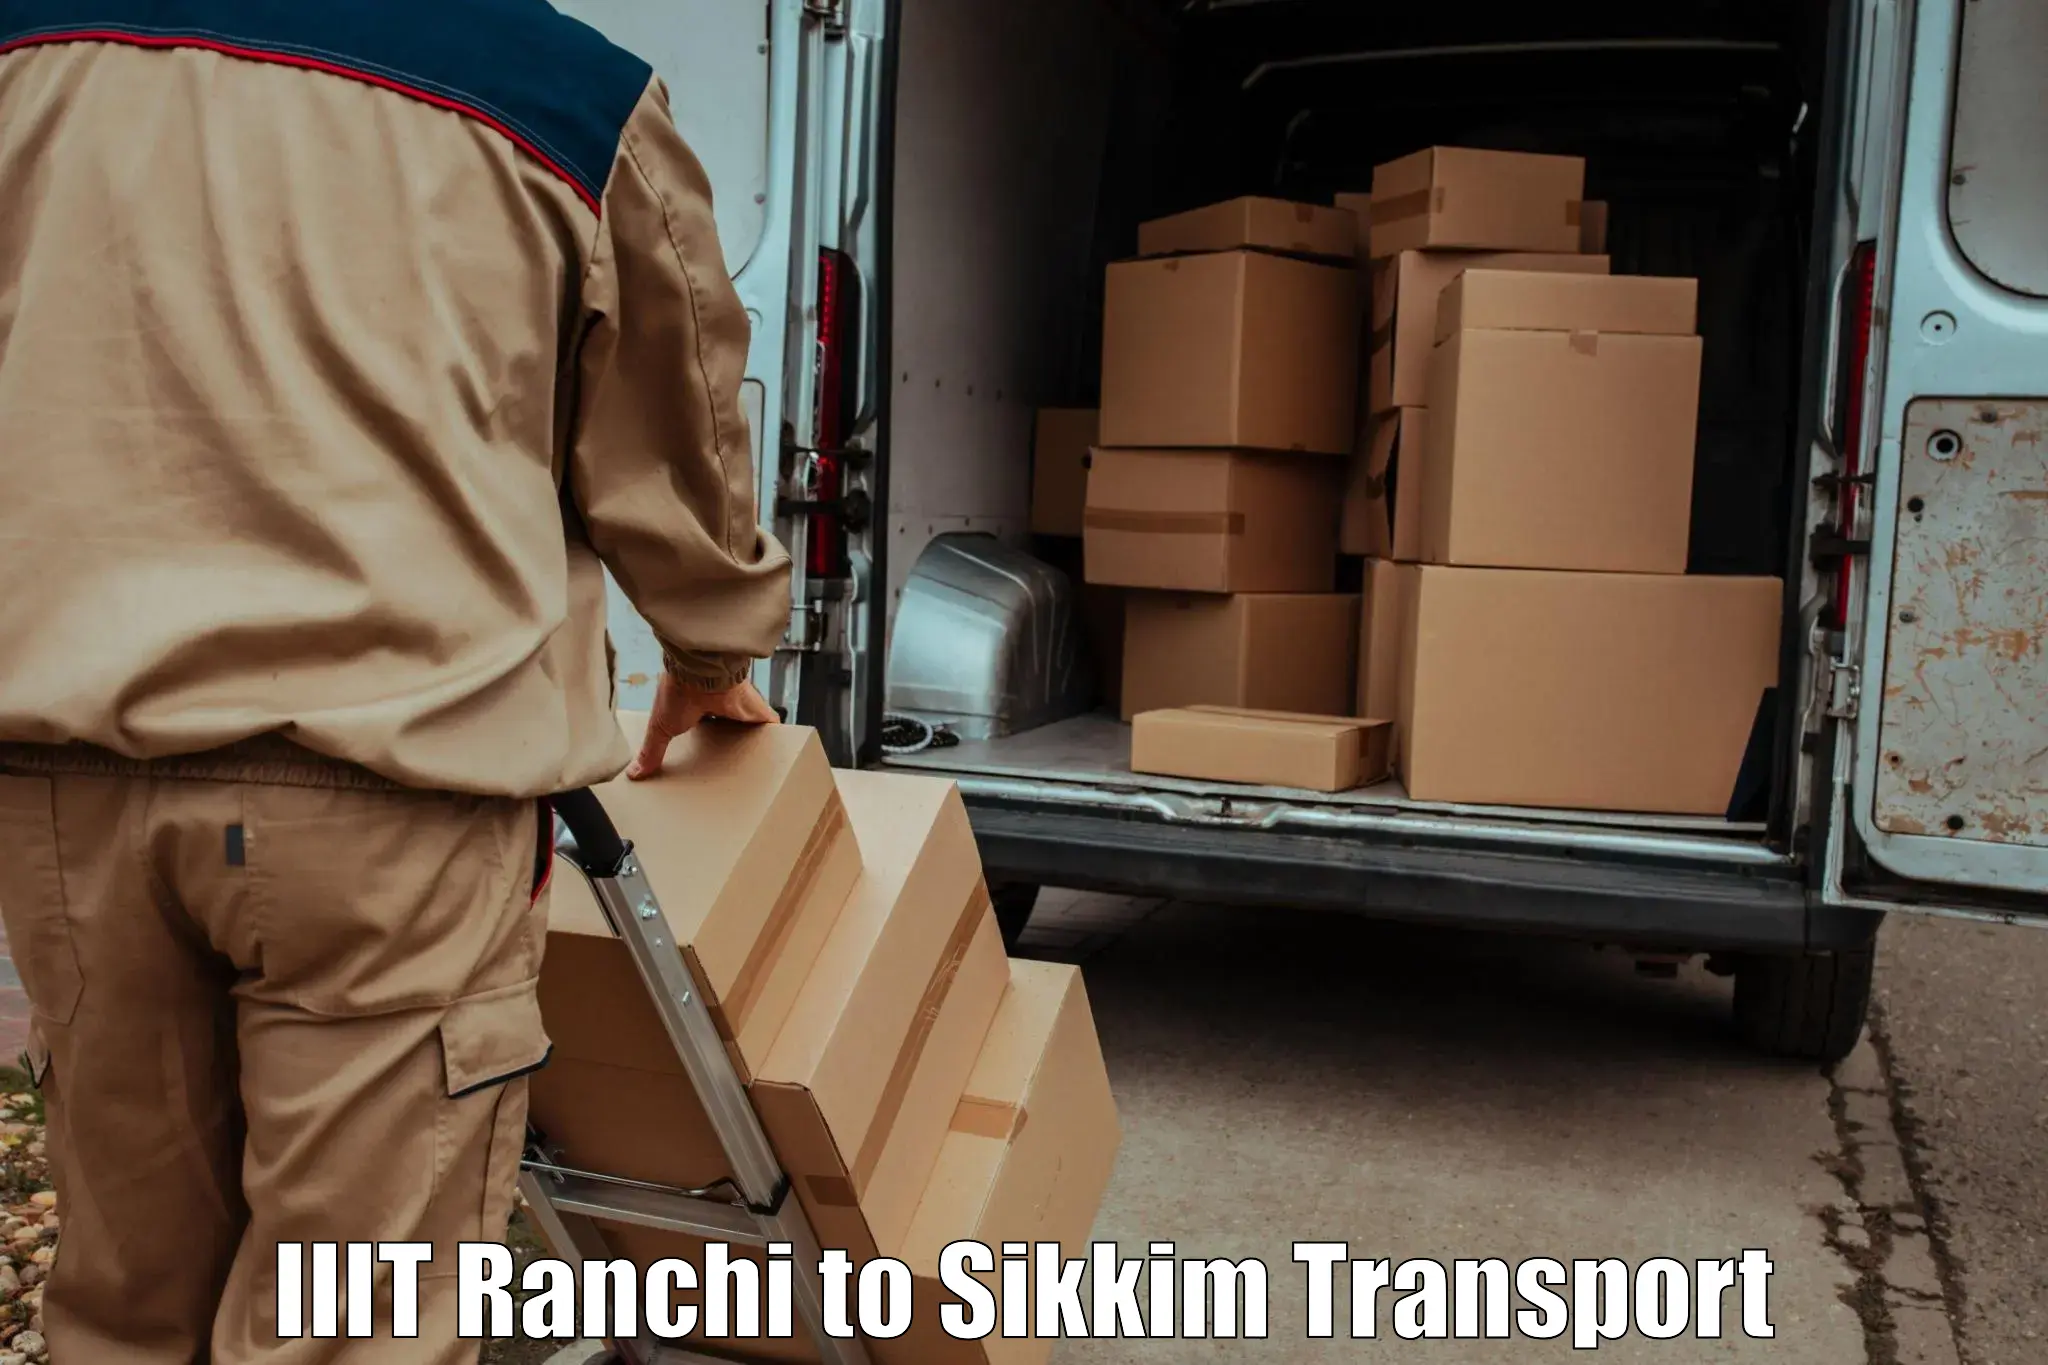 Daily transport service IIIT Ranchi to Sikkim